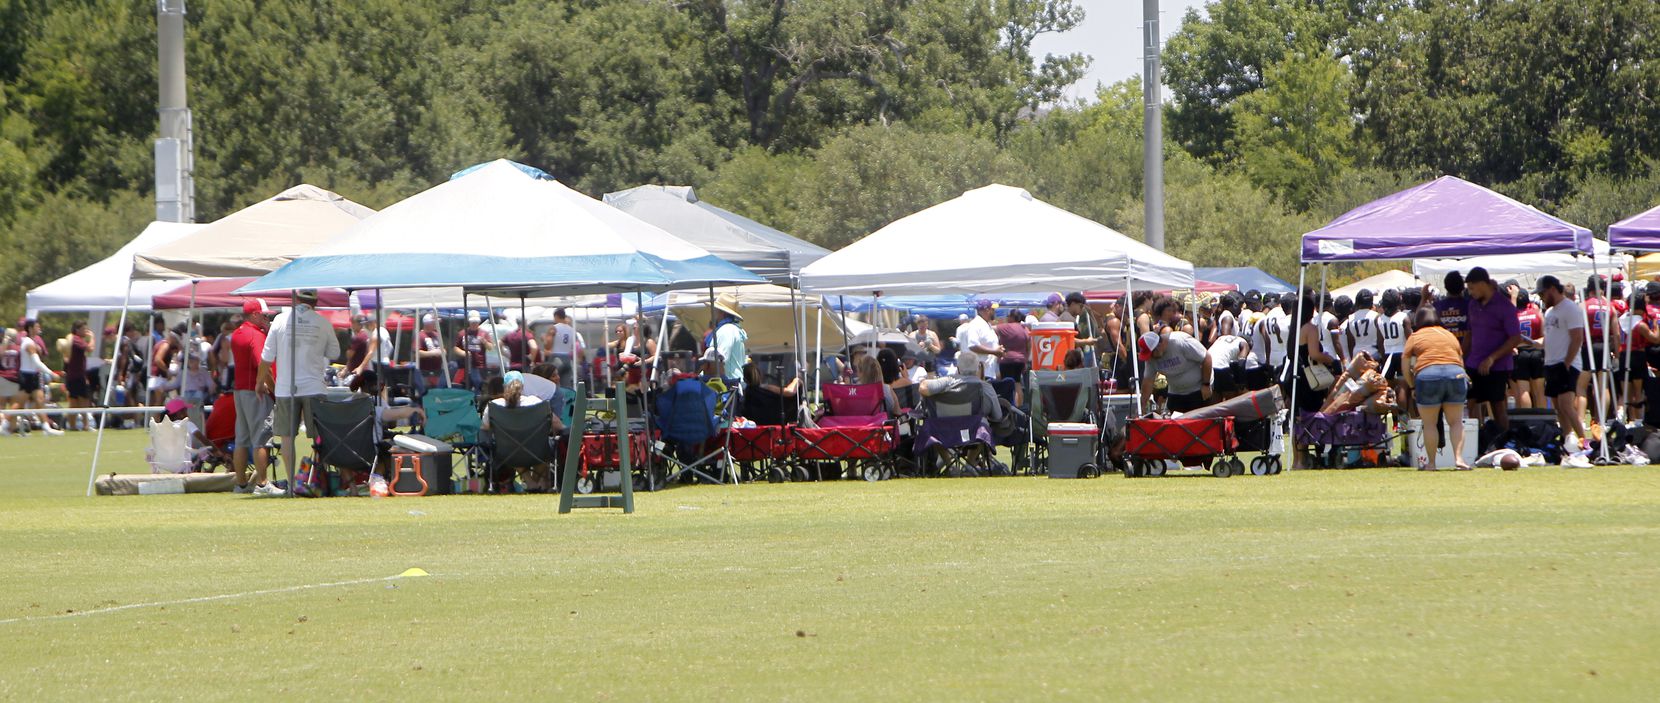 Pop up canopies were found in numbers as teams and fans sought out relief from the sun....